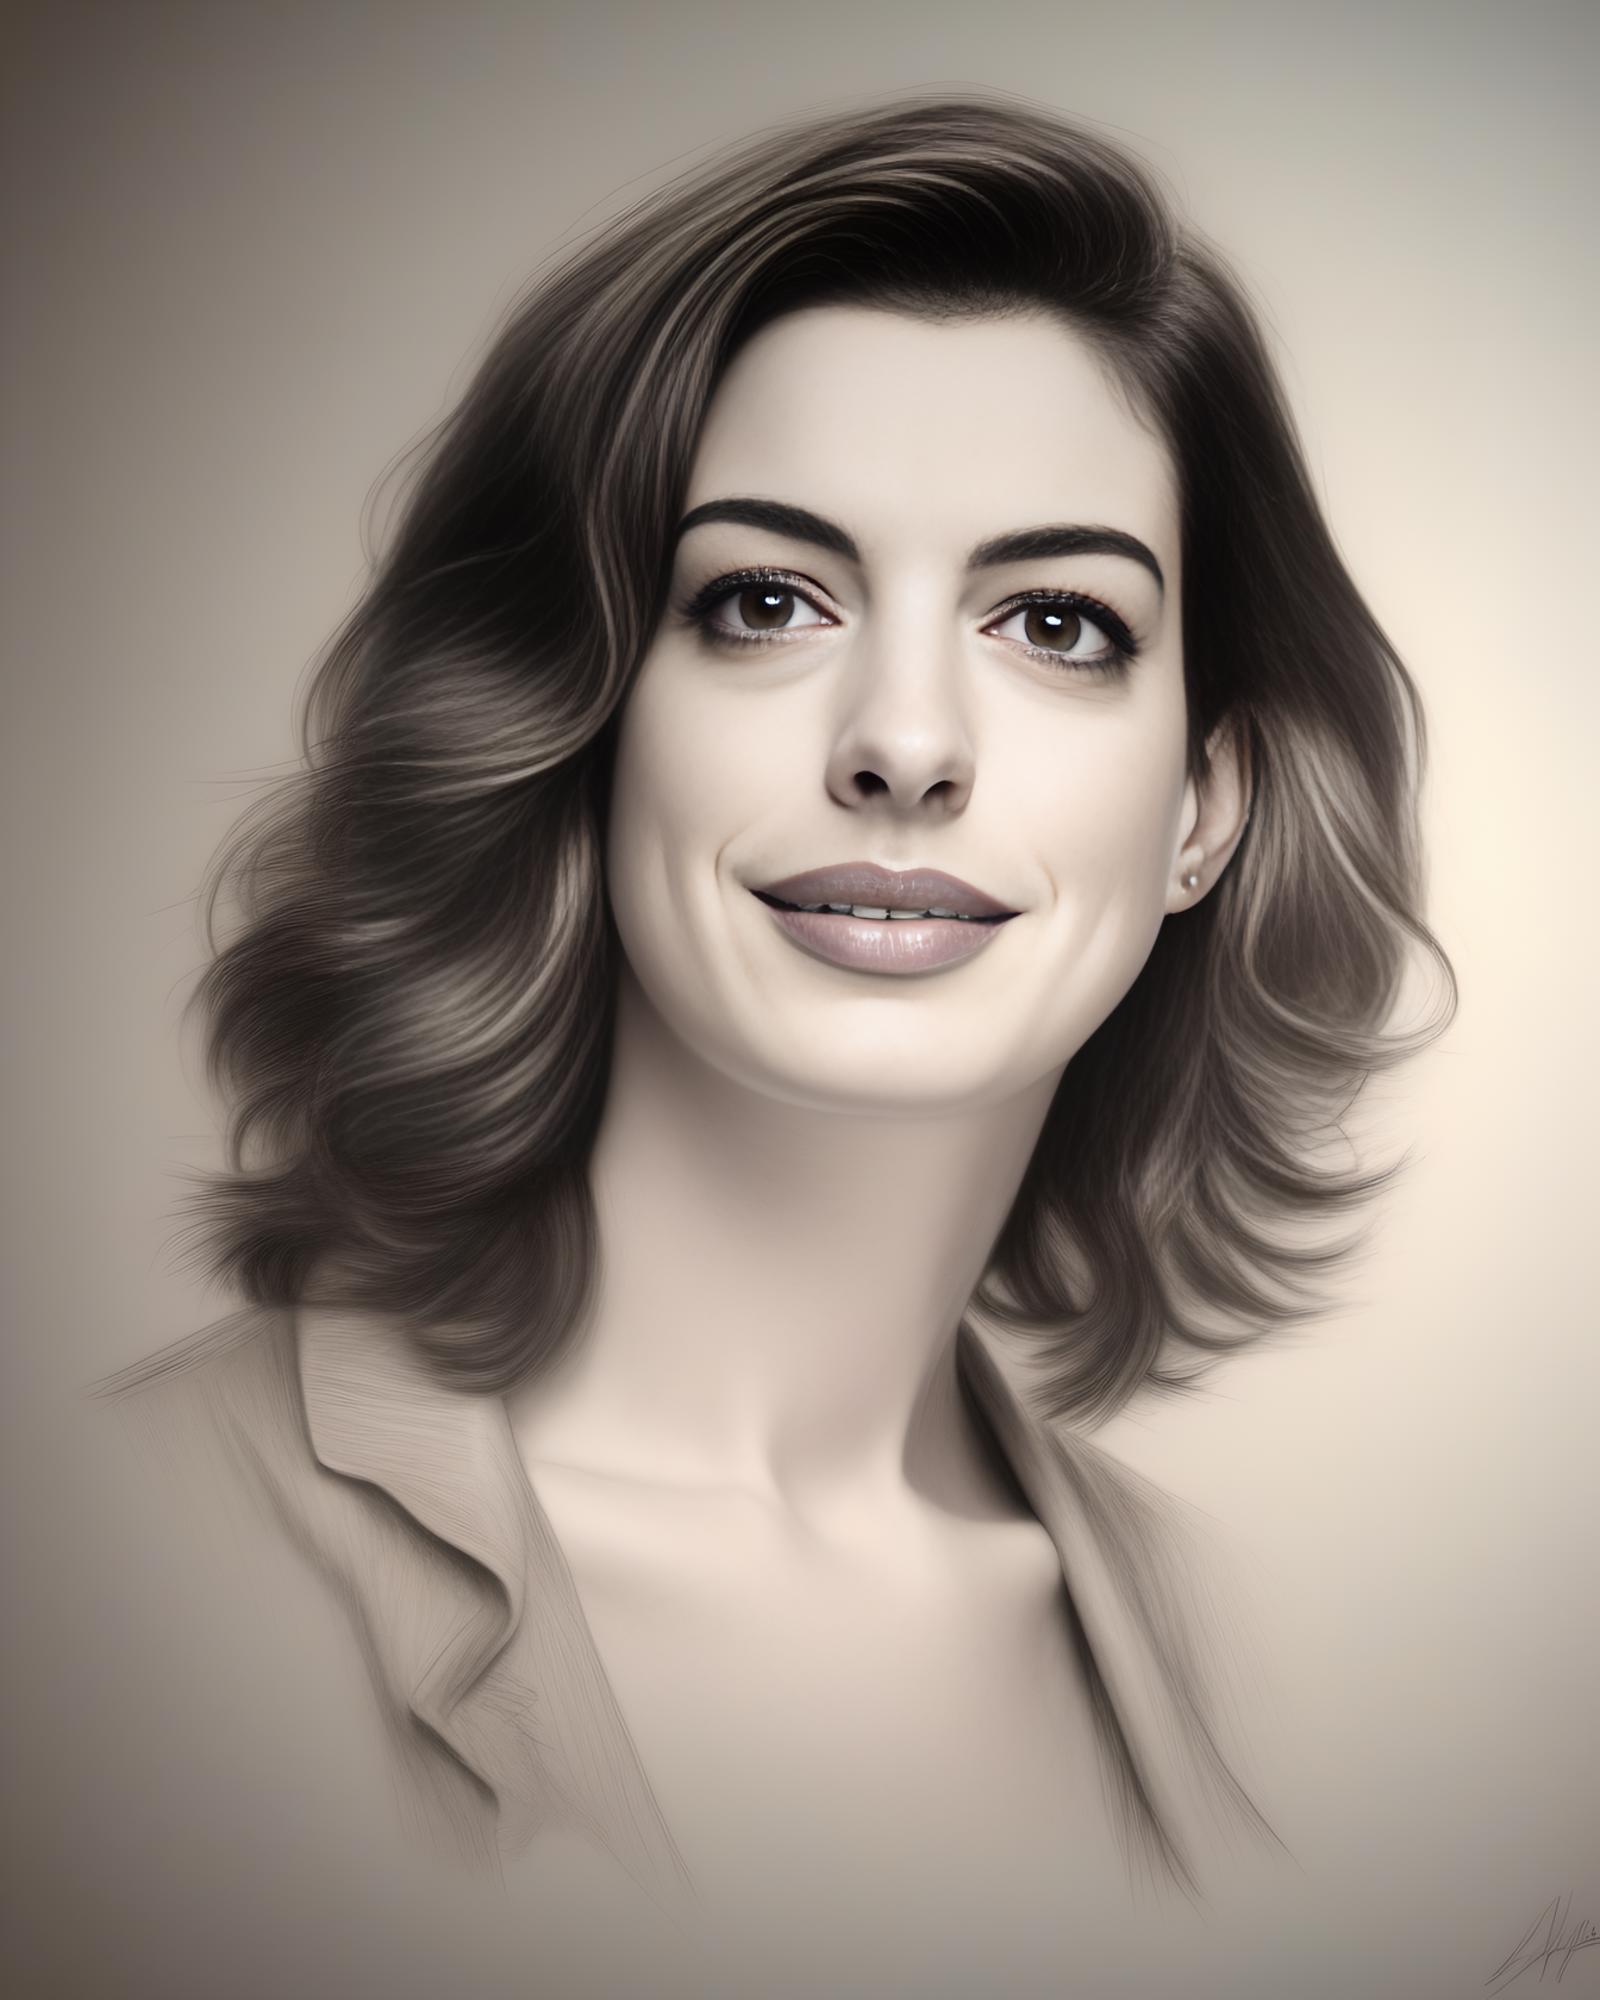 Anne Hathaway image by parar20